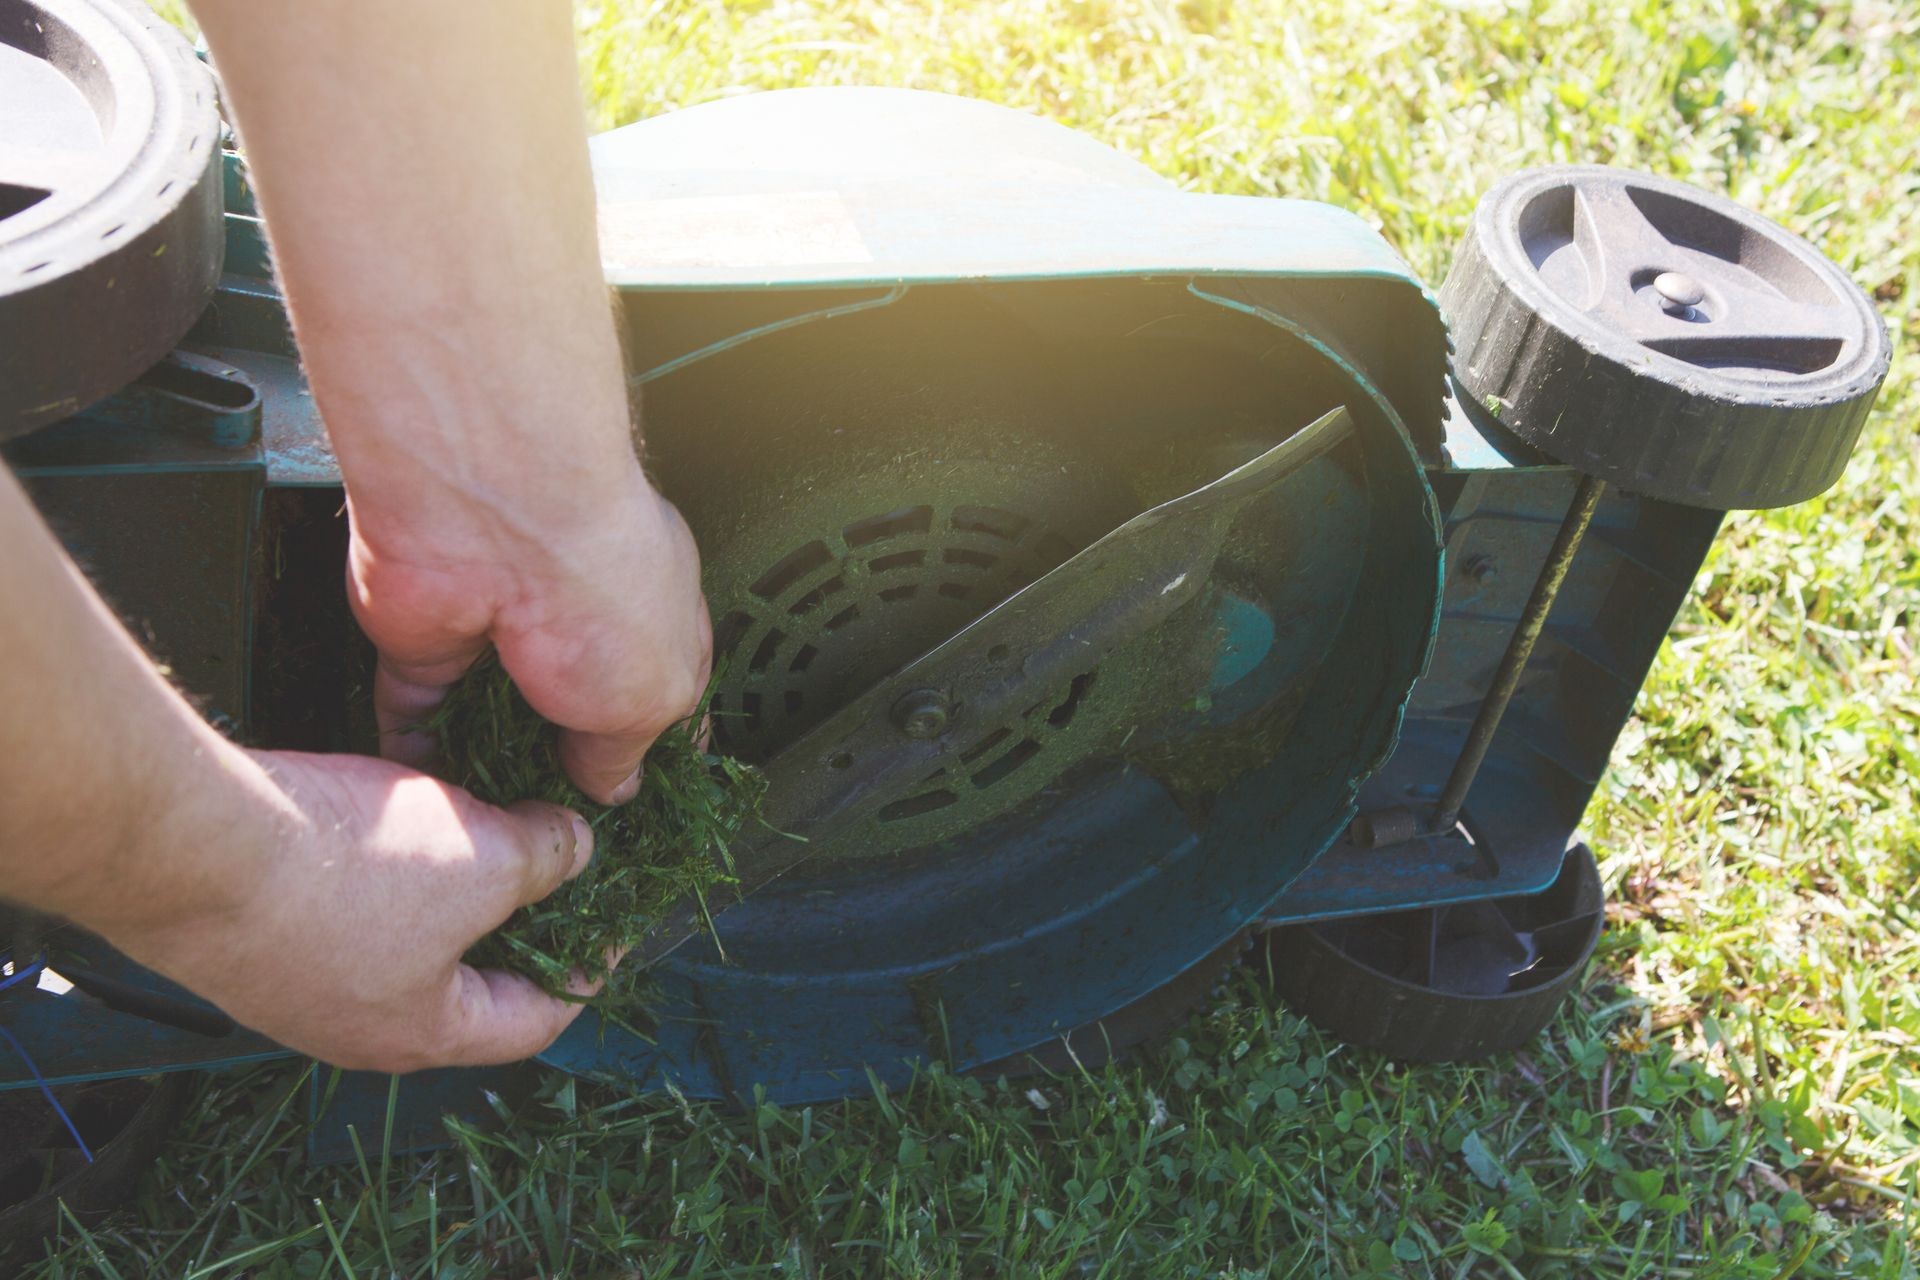 Cutting green grass electric lawn mower. The gardener cares for the device, cleans the knives of dirt.